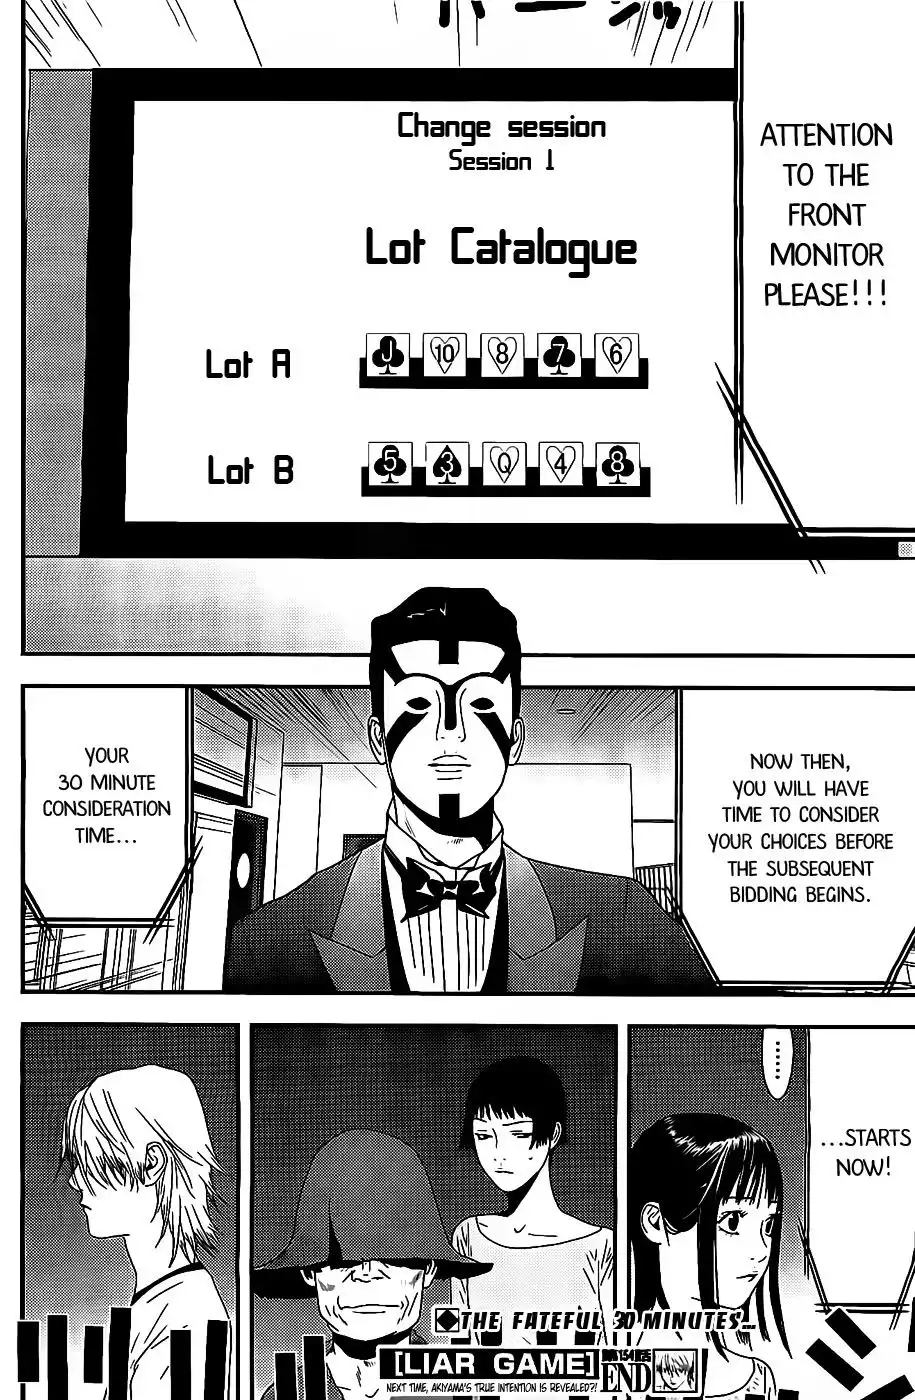 Liar Game Chapter 154